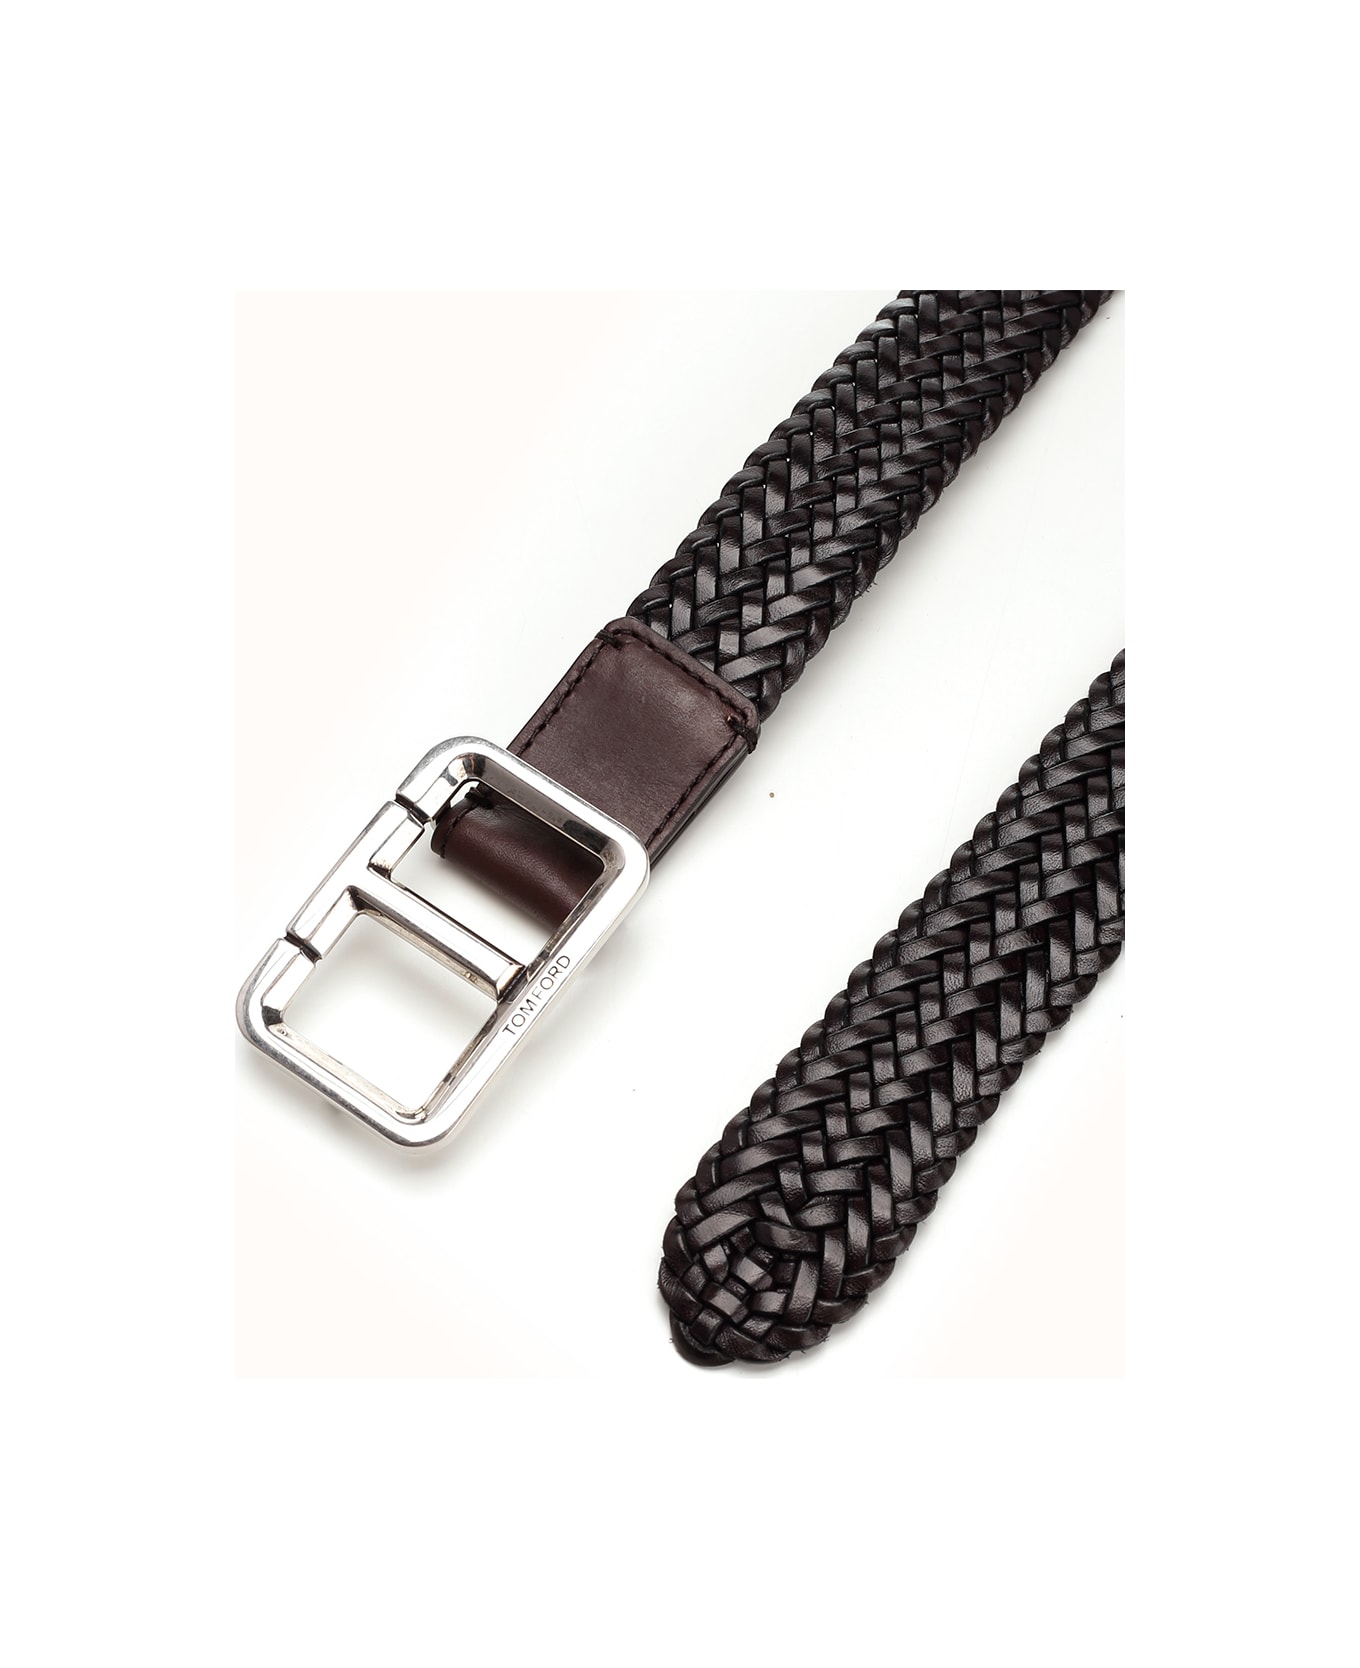 Tom Ford "t" Belt In Woven Leather - Brown